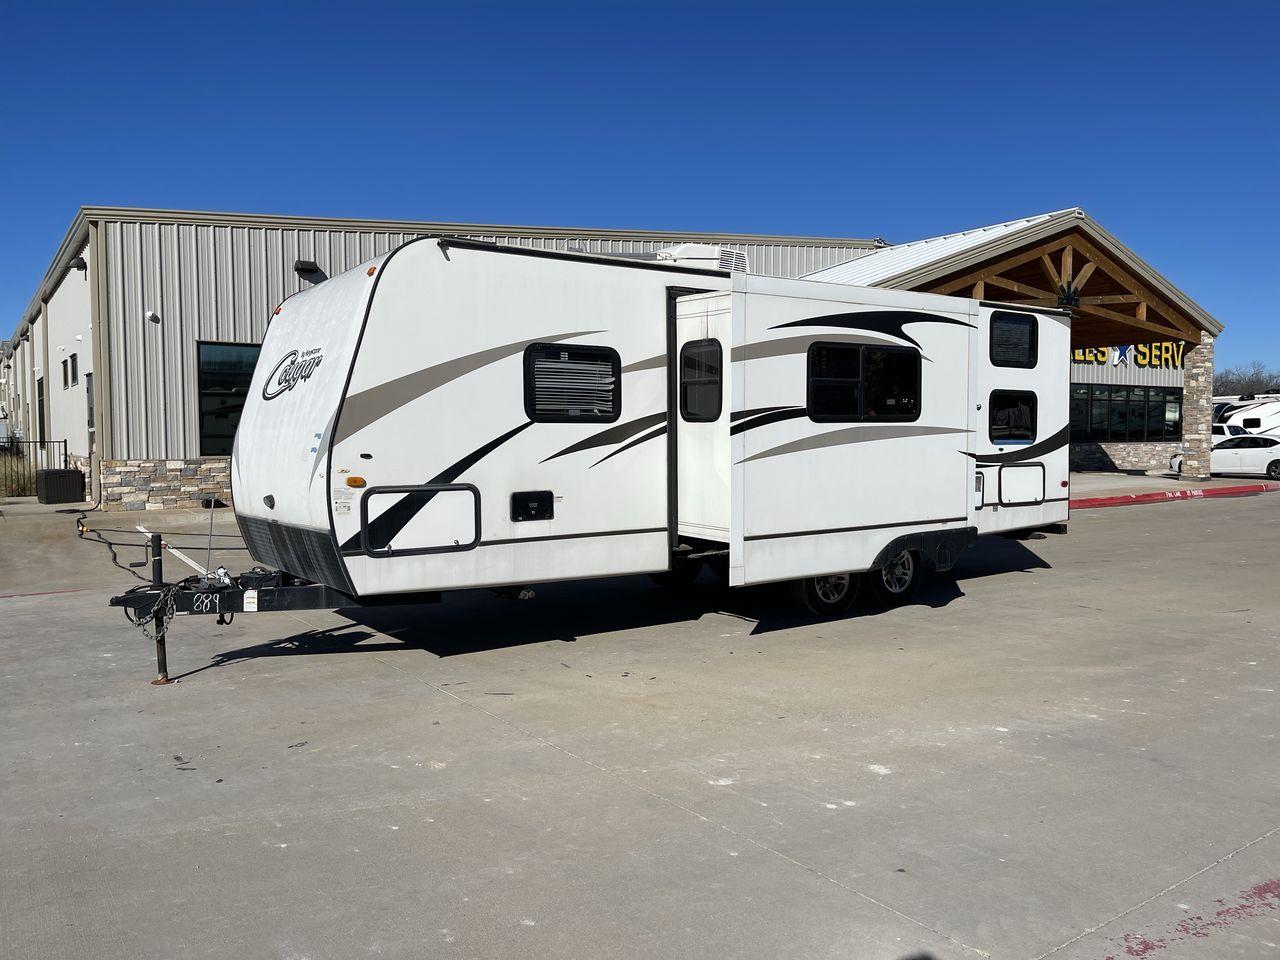 2014 WHITE KEYSTONE COUGAR MDL 260RB (4YDT26027EV) , Length: 29.67 ft. | Dry Weight: 5,065 lbs. | Slides: 1 transmission, located at 4319 N Main Street, Cleburne, TX, 76033, (817) 221-0660, 32.435829, -97.384178 - The 2014 Keystone Cougar Model 260RB travel trailer offers the ideal fusion of elegance and utility. With its roomy and welcoming interior, this well-designed RV is a great option for both long trips and weekend excursions. This travel trailer has a length of 29.8 ft and weighs 5,065 lbs. It is s - Photo #21